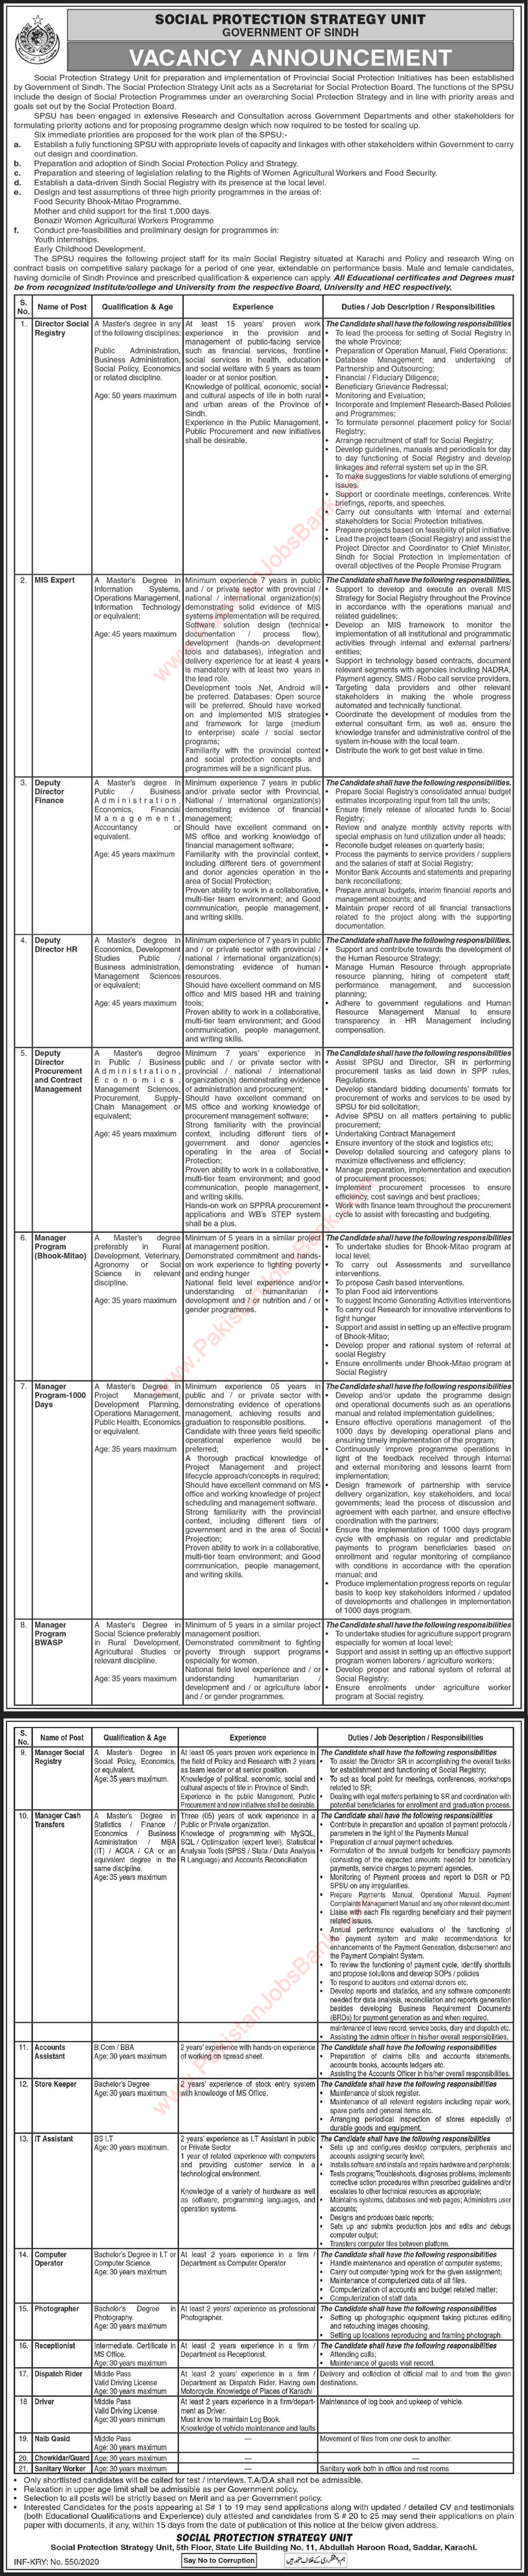 Social Protection Strategy Unit Sindh Jobs 2020 February Deputy Directors, Managers & Others Latest